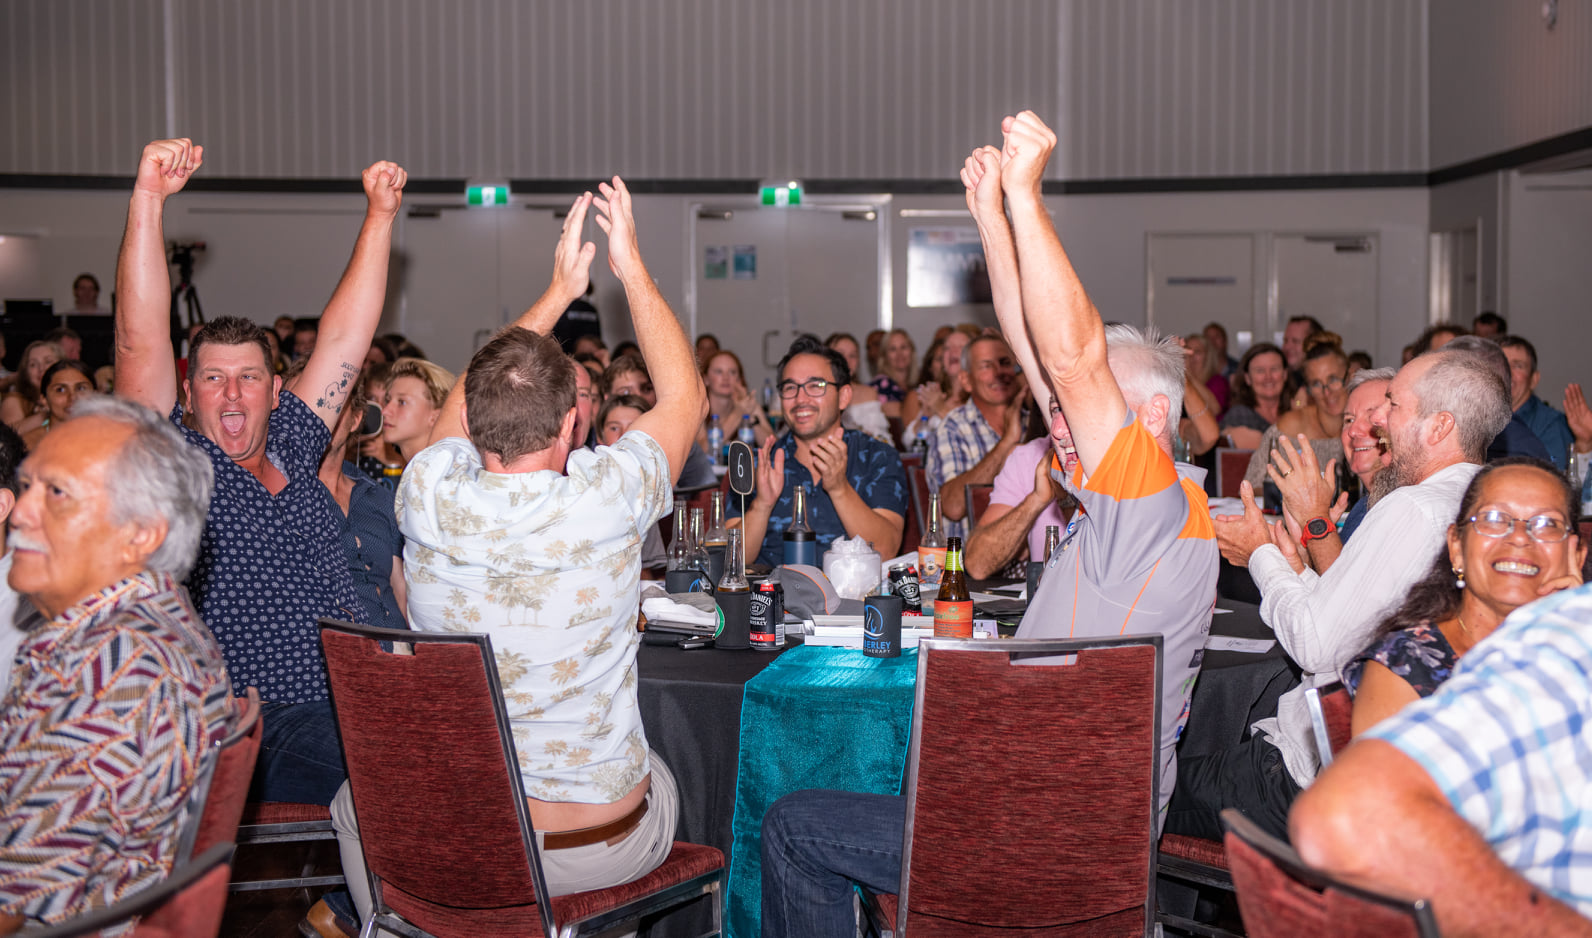 A group of people cheering at a table